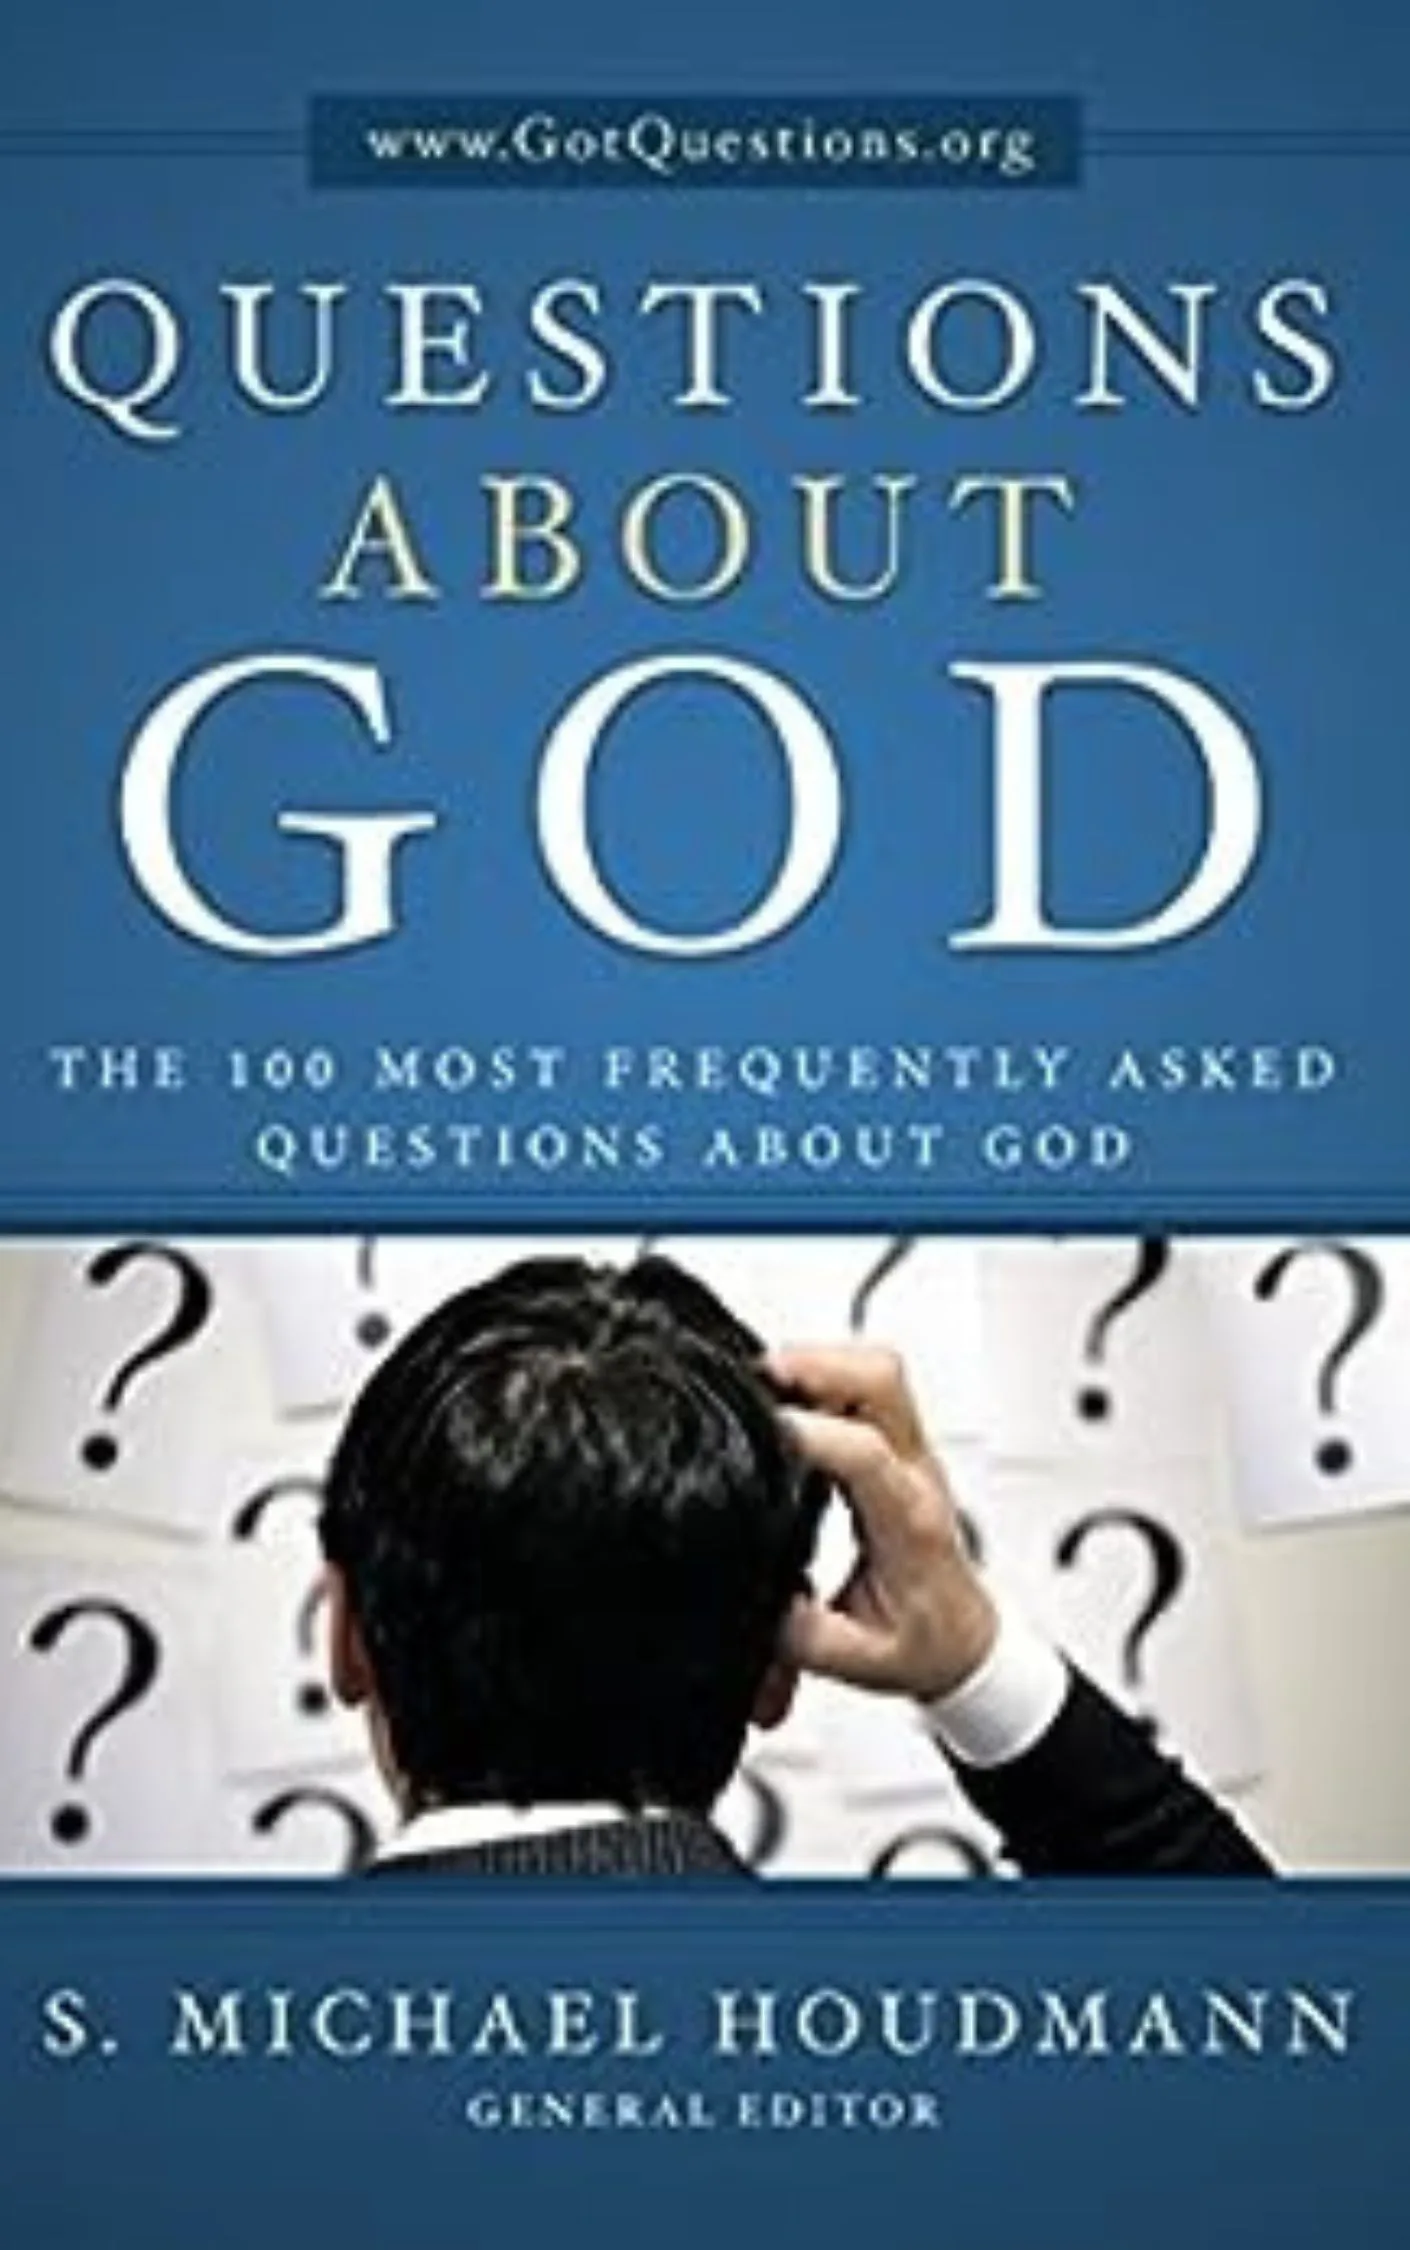 Questions about God - The 100 Most Frequently Asked Questions About God<br />
By: S. Michael Houdmann